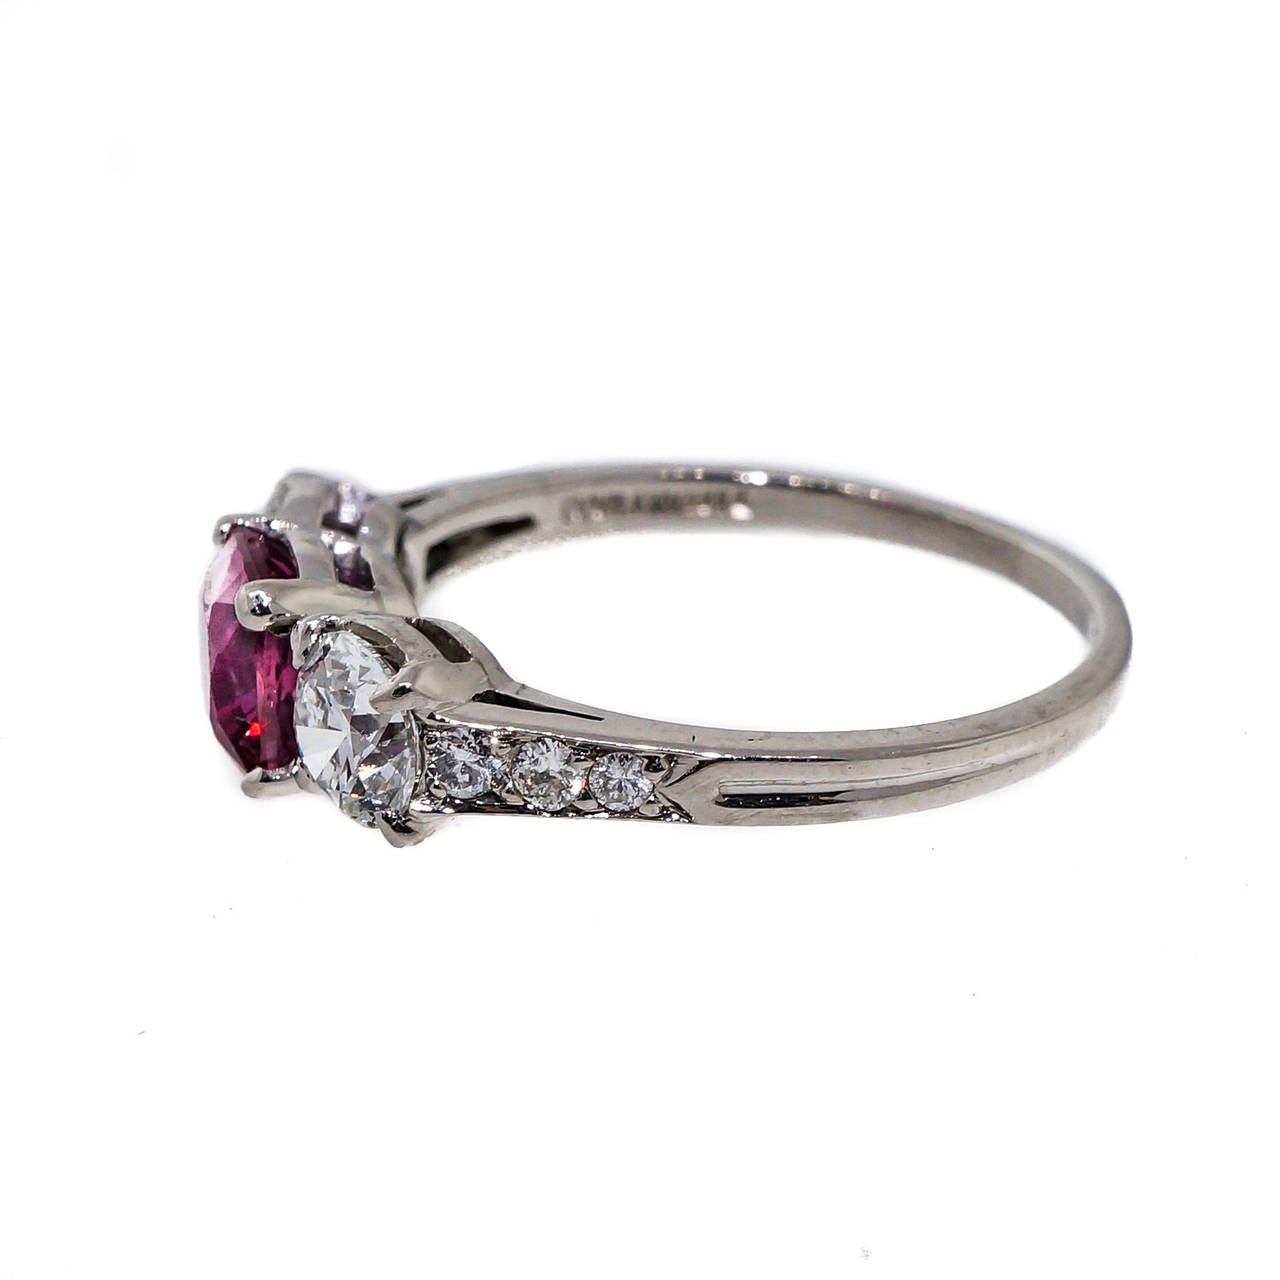 Natural world class top gem hot pink cushion Sapphire, one of the brightest and best we have ever seen. It is set in an original 1940's Tiffany jewel correctly stamped and made 1940-1945 in 950 Palladium when Platinum was used for the War effort.